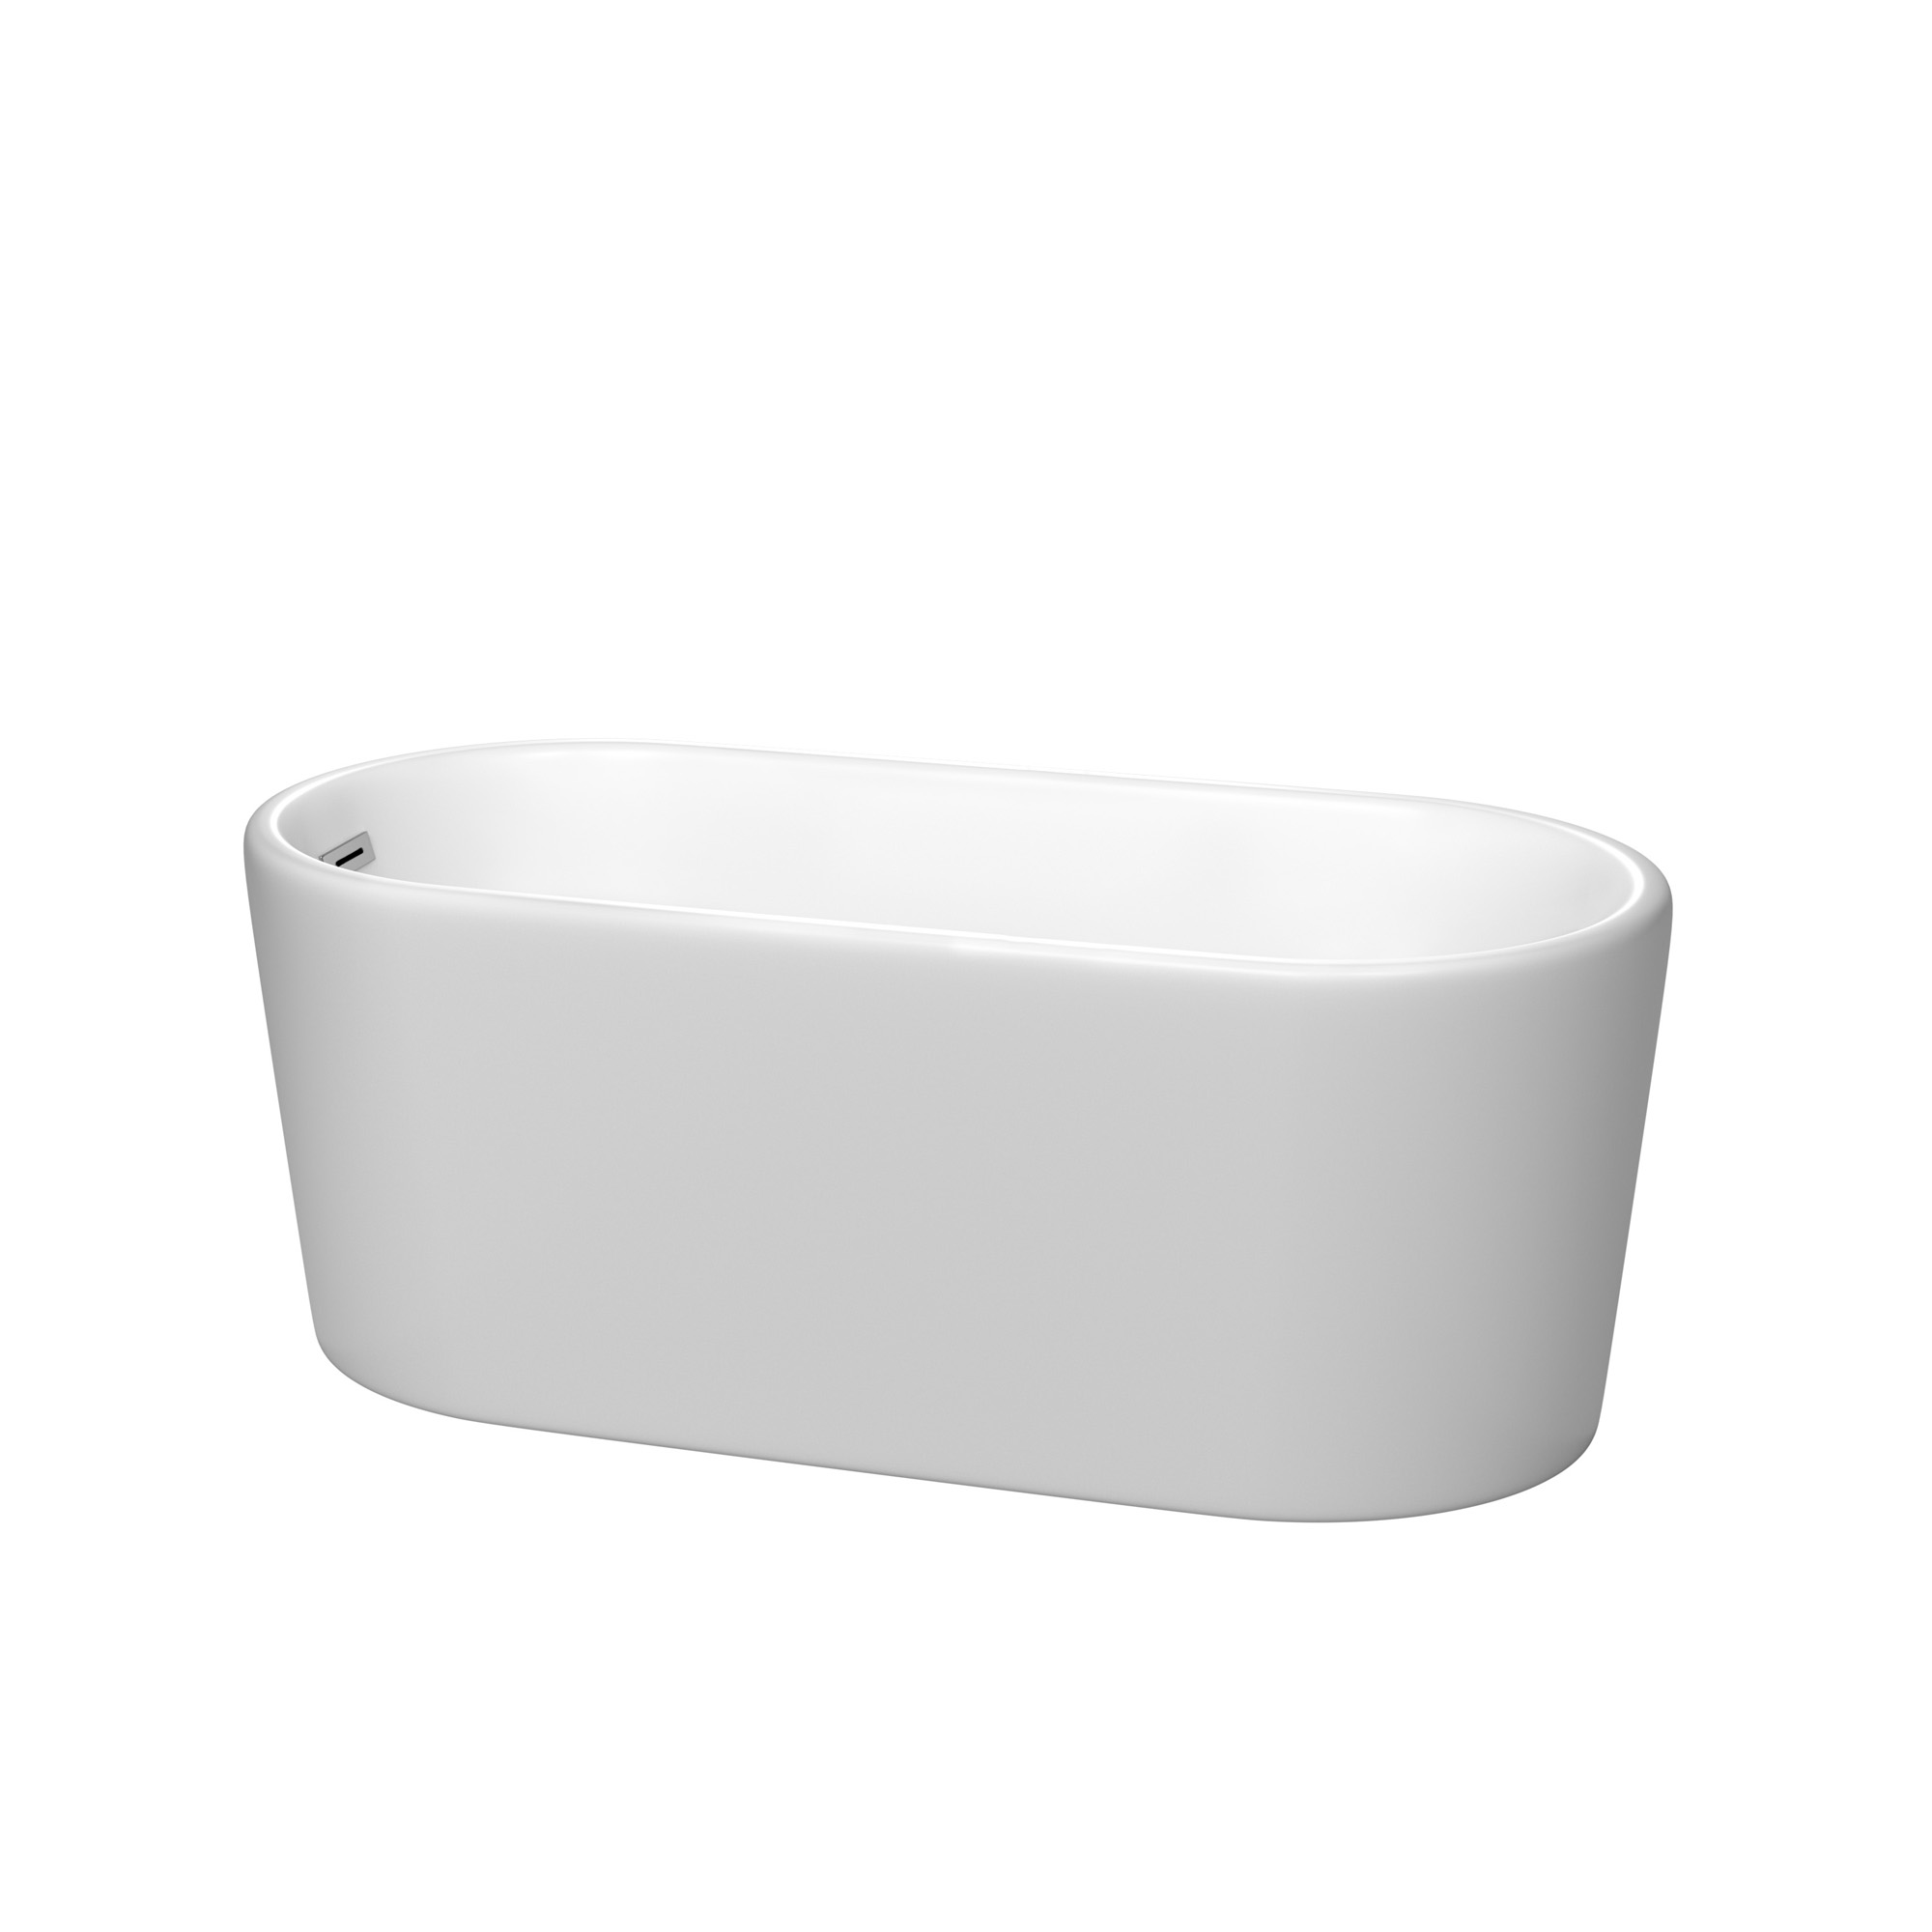 59" Freestanding Bathtub in Matte White with Polished Chrome Drain and Overflow Trim